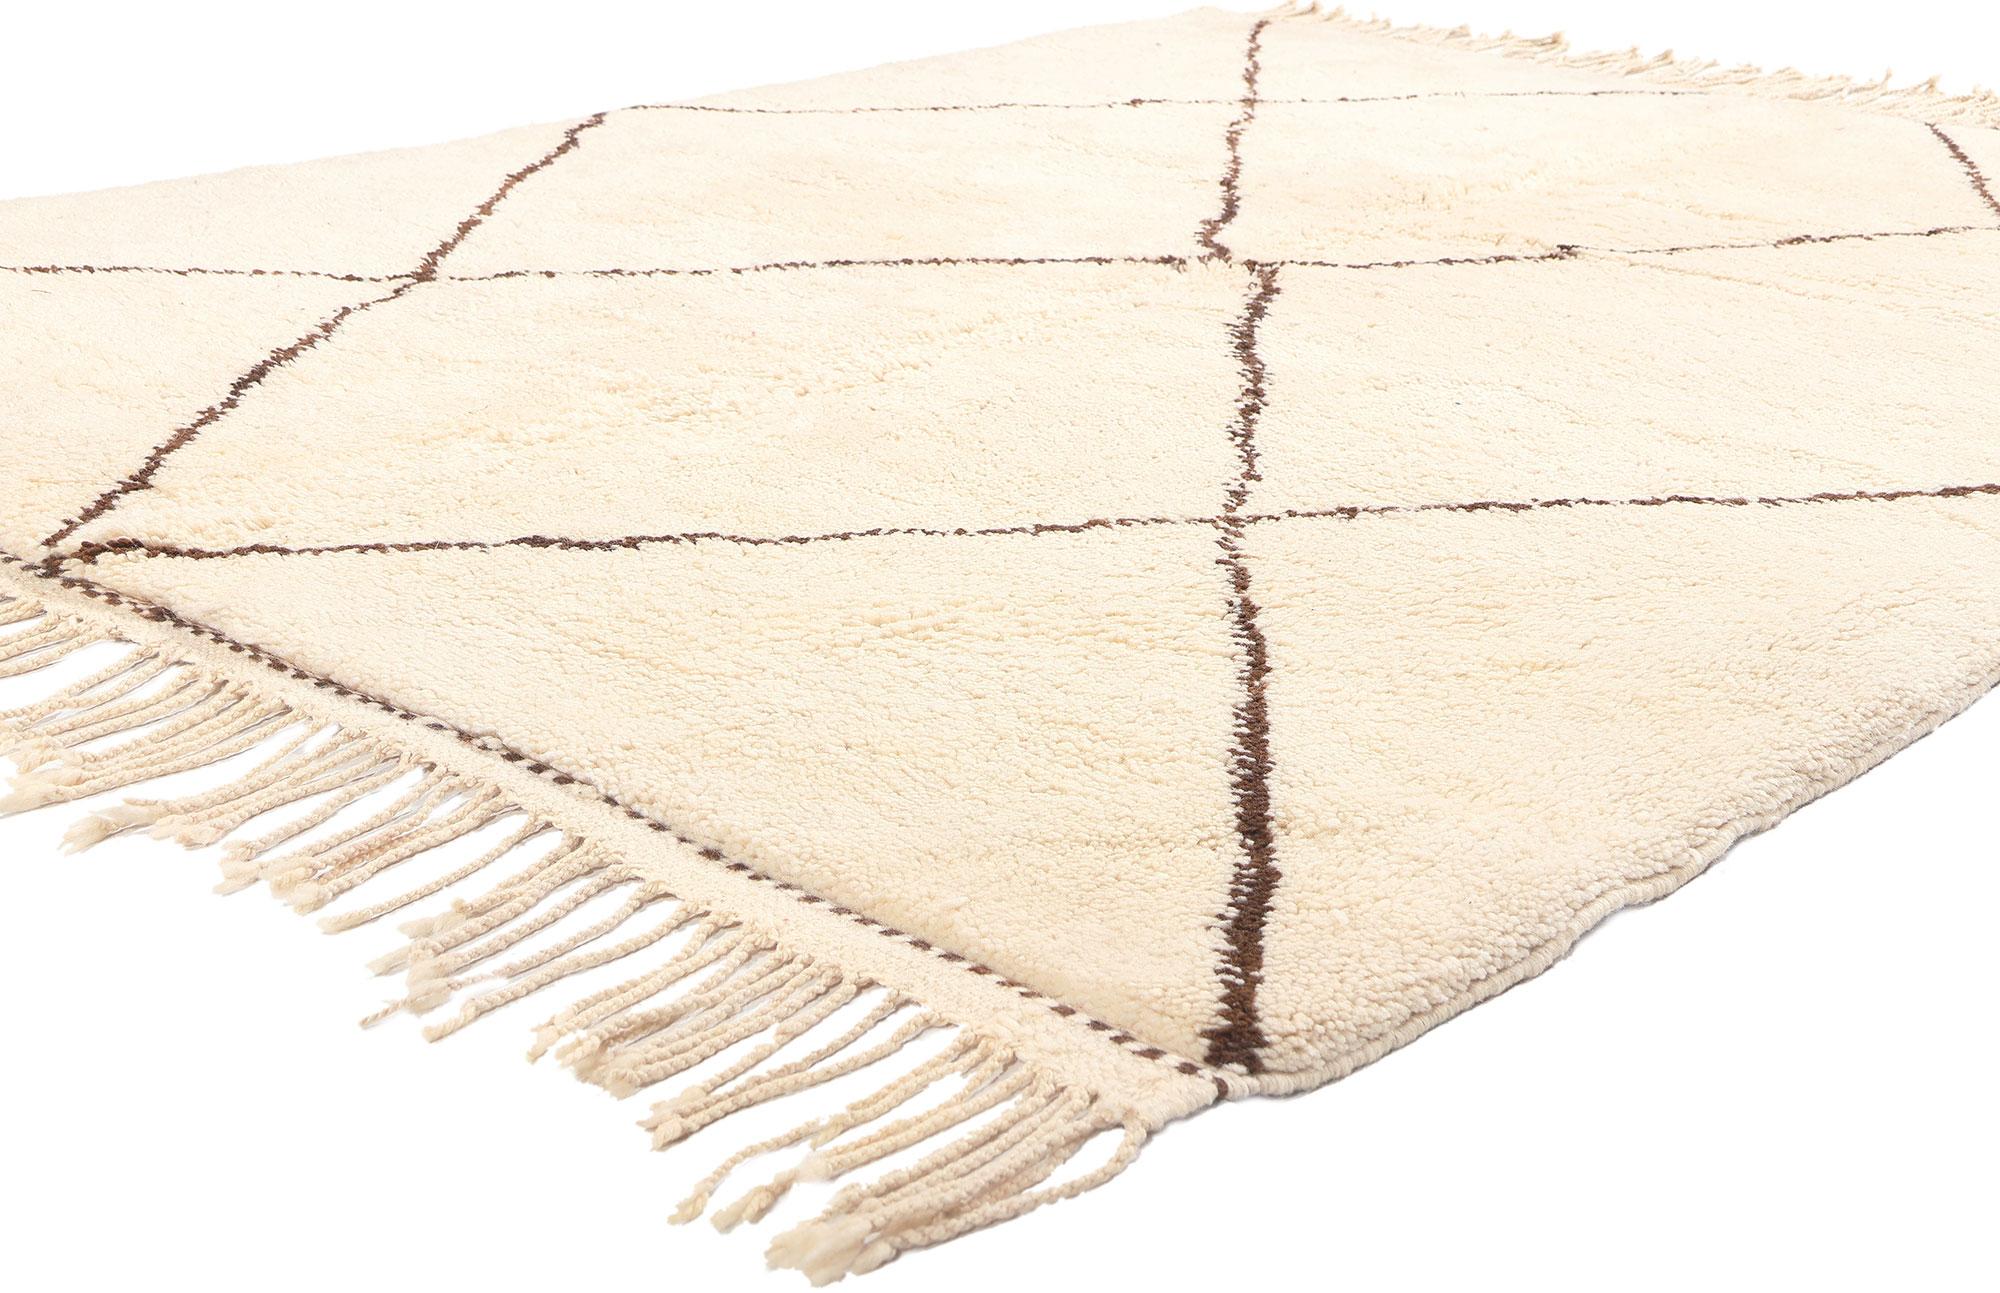 20767 Modern Moroccan Beni Ourain Rug, 05'03 x 06'05.
In the marriage of minimalist Shibui principles and the modern coziness of Hygge, this hand-knotted wool Moroccan Beni Ourain rug emerges as a masterpiece of simplicity and refined comfort. The